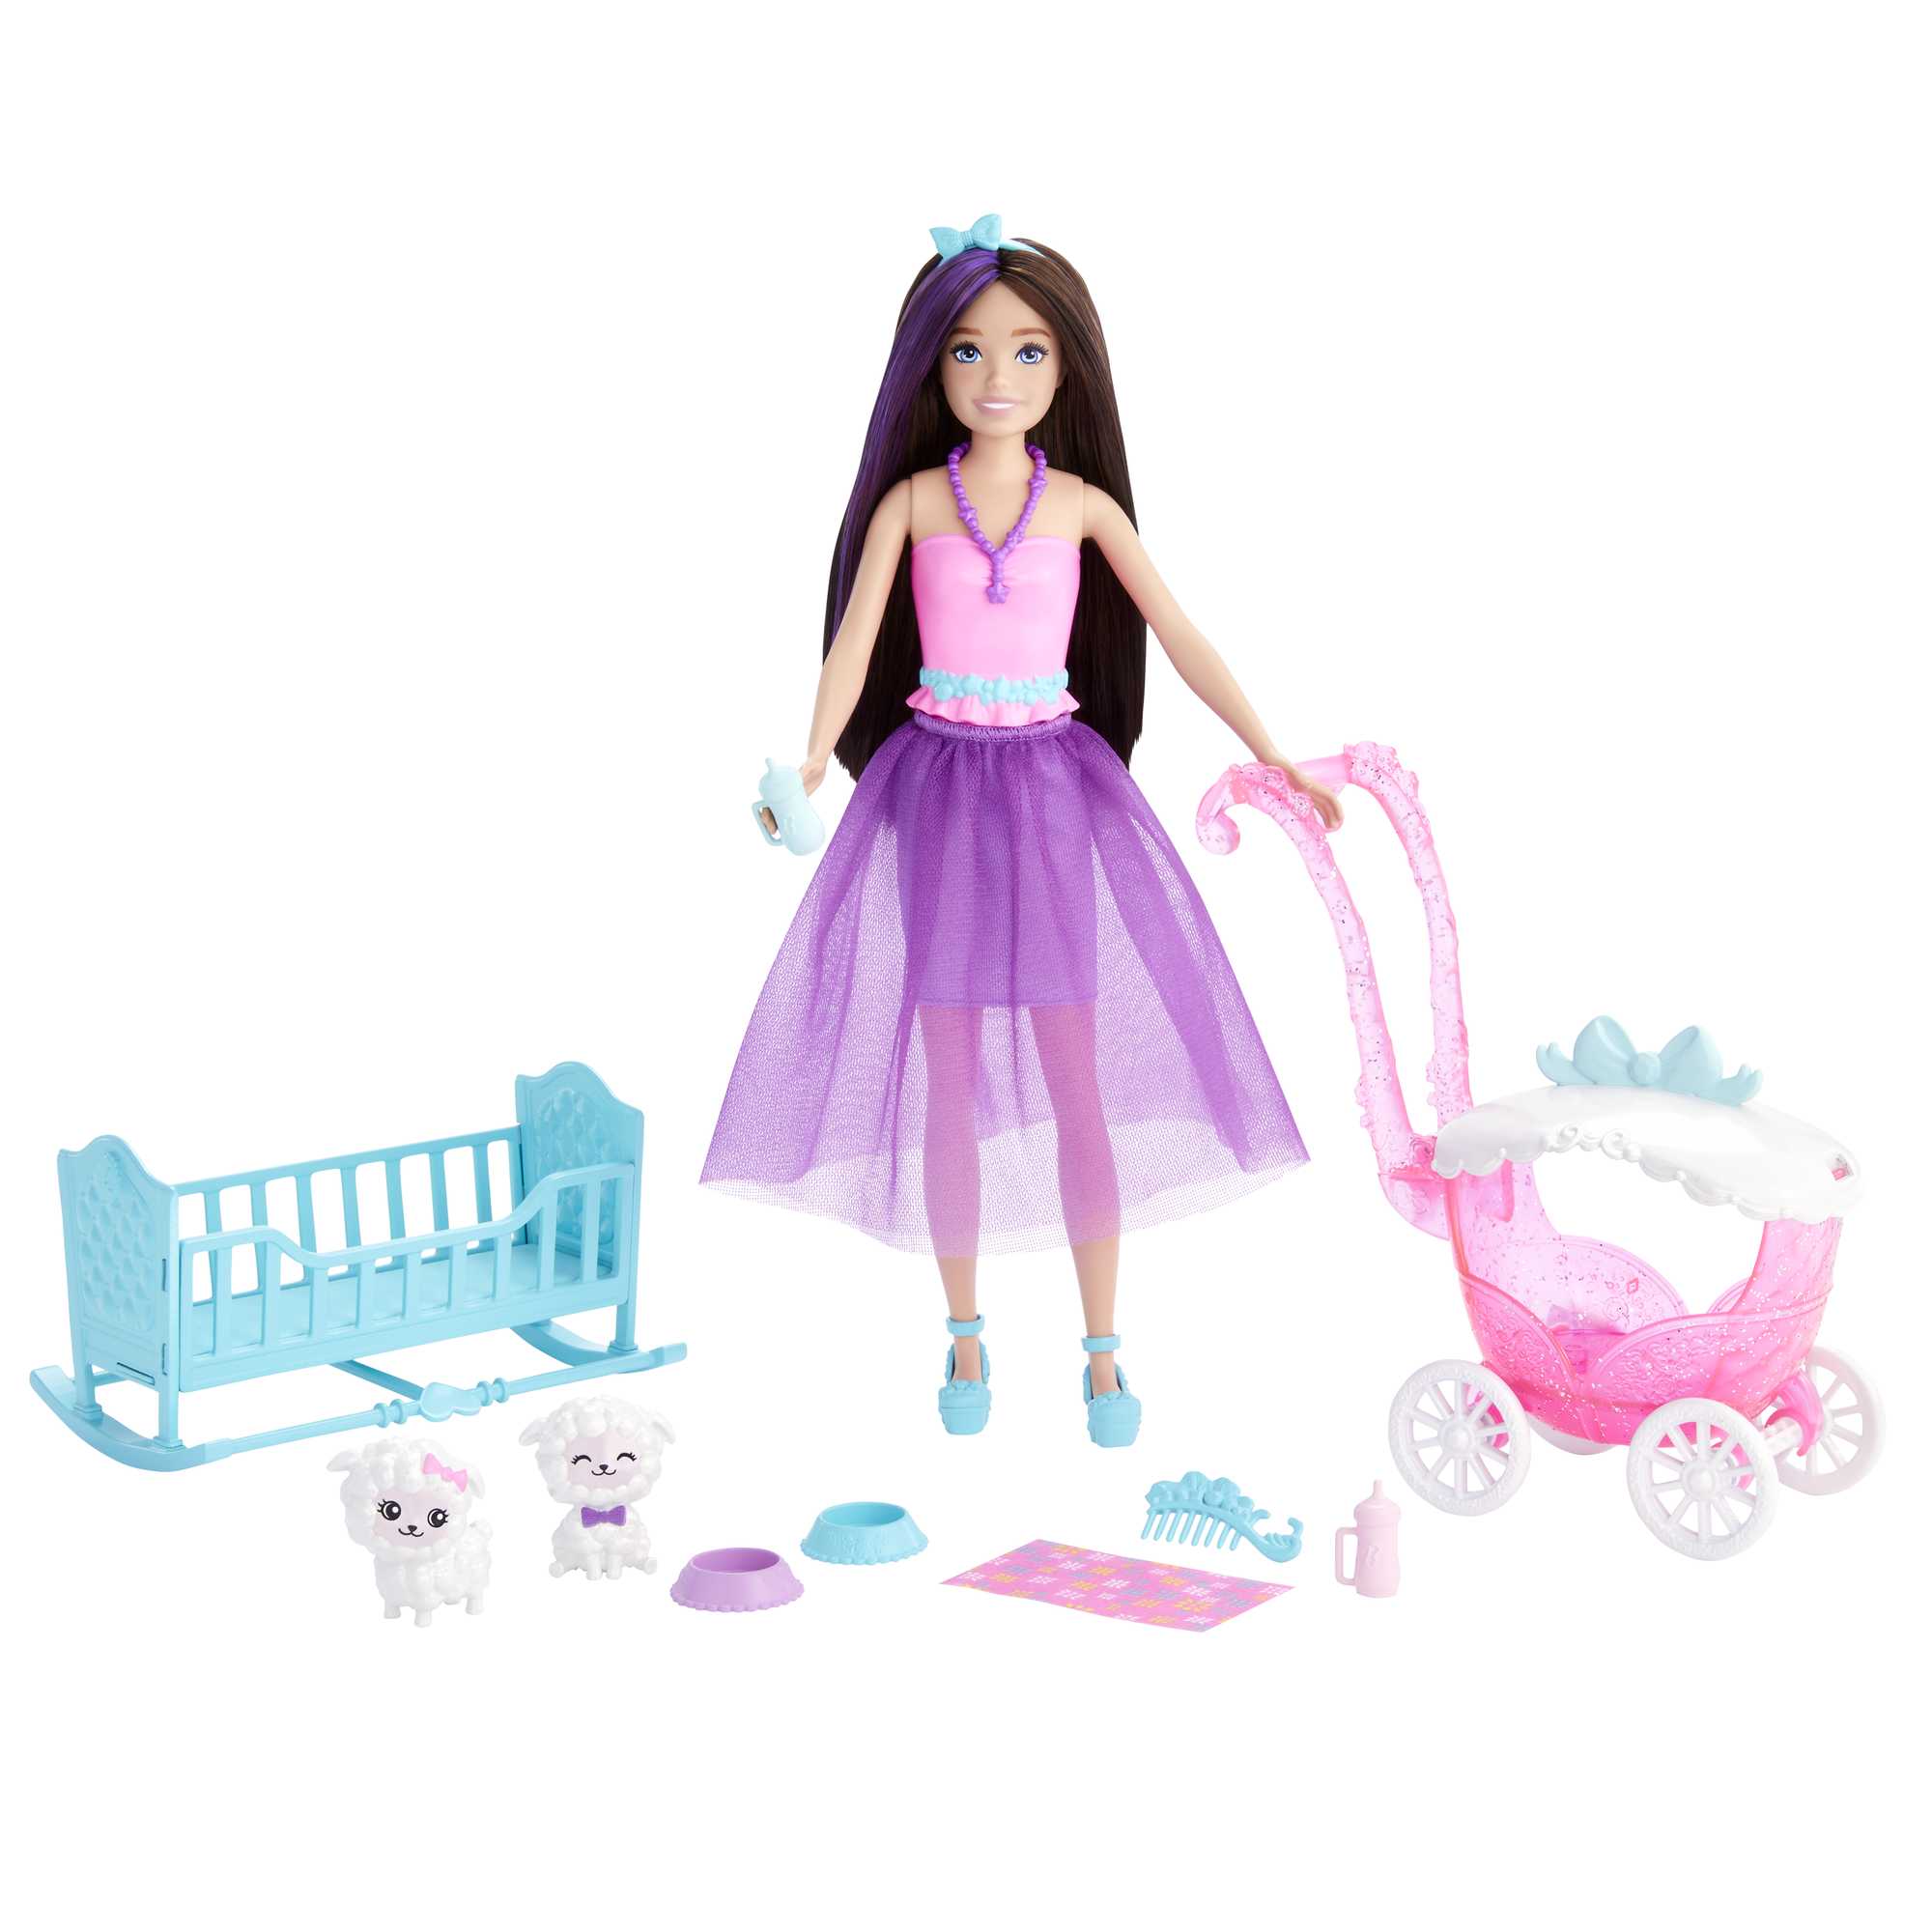 Barbie - Skipper Doll And Nurturing Playset With Lambs And Stroller